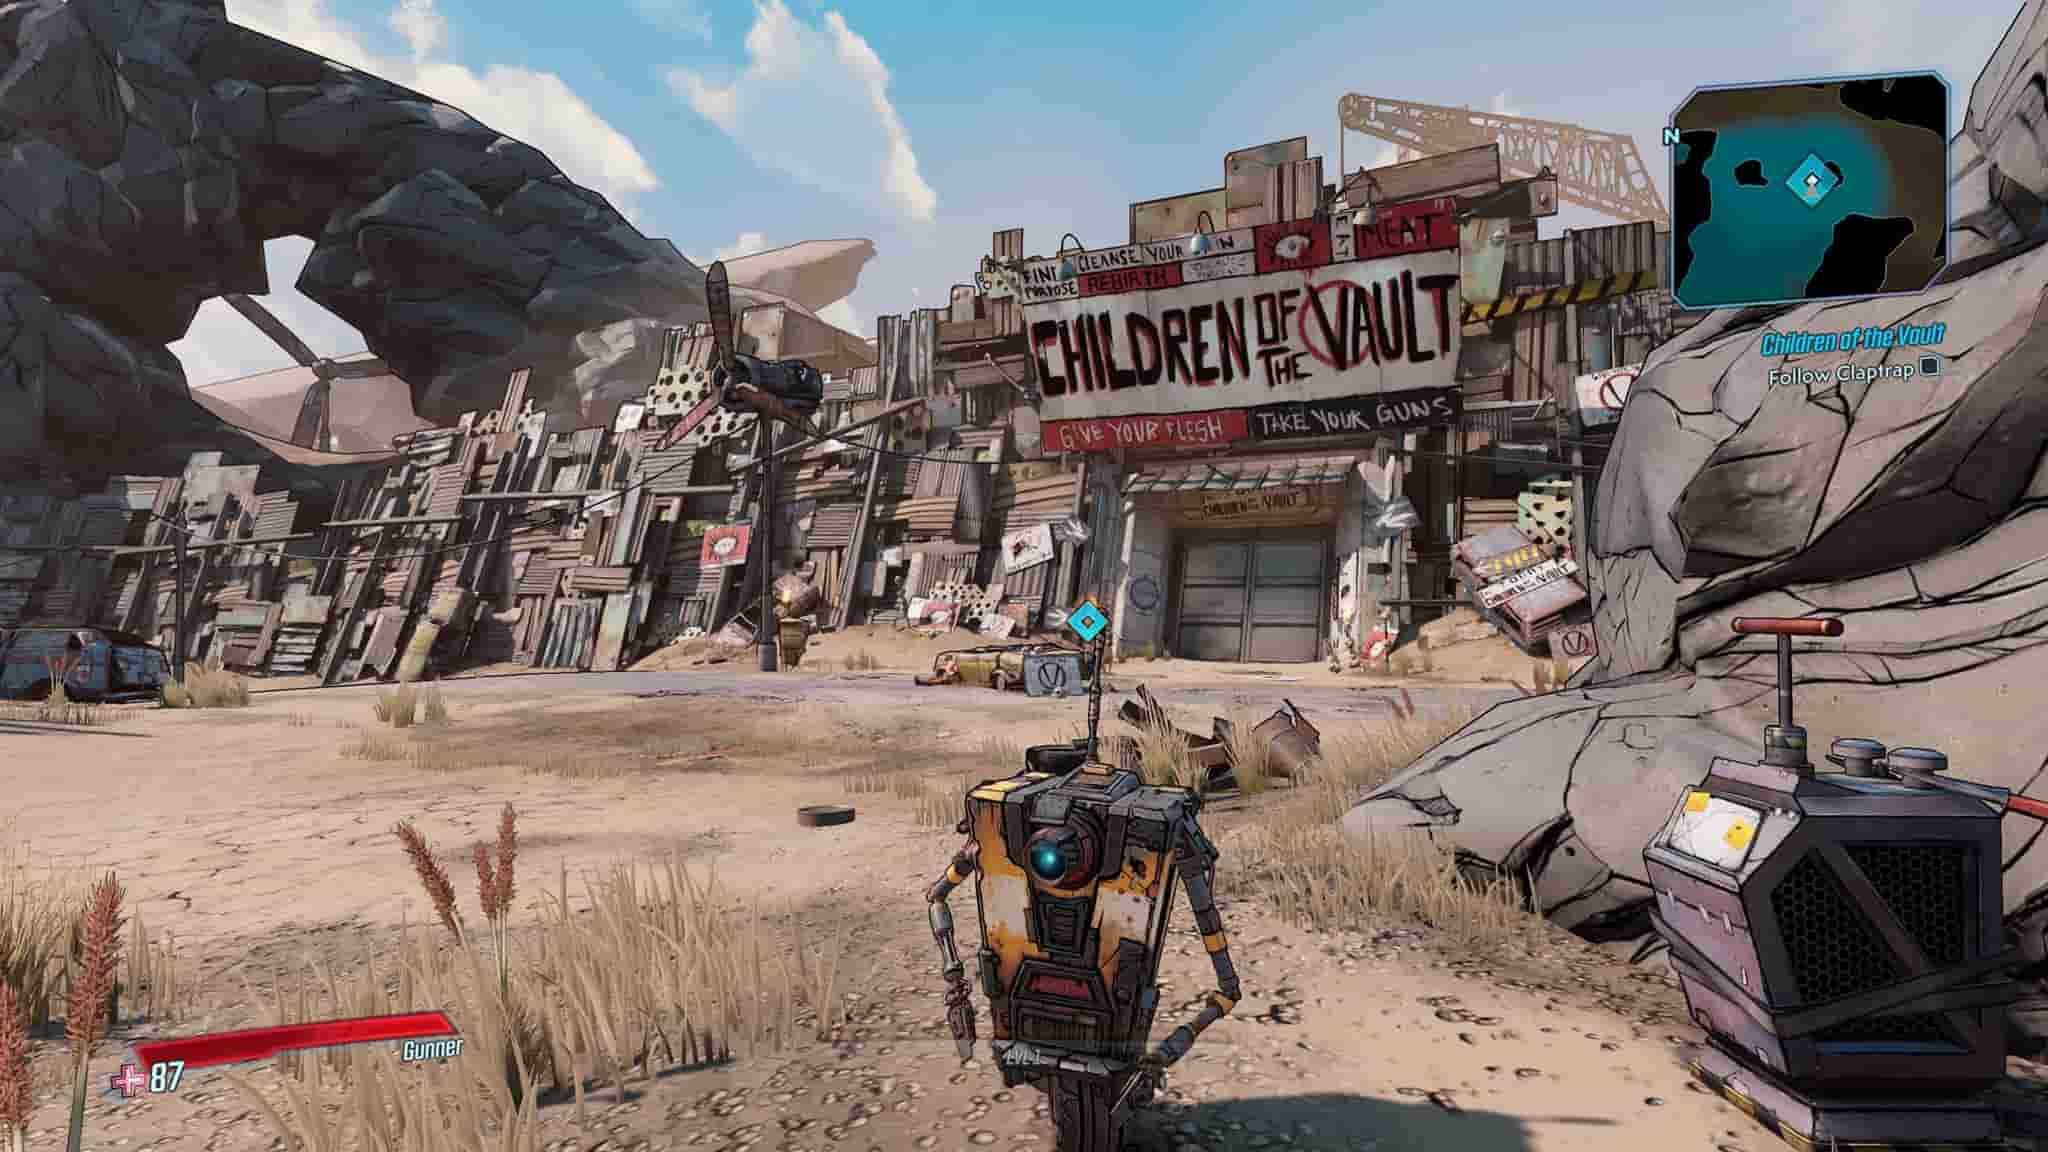 Borderlands 3 for PC Review